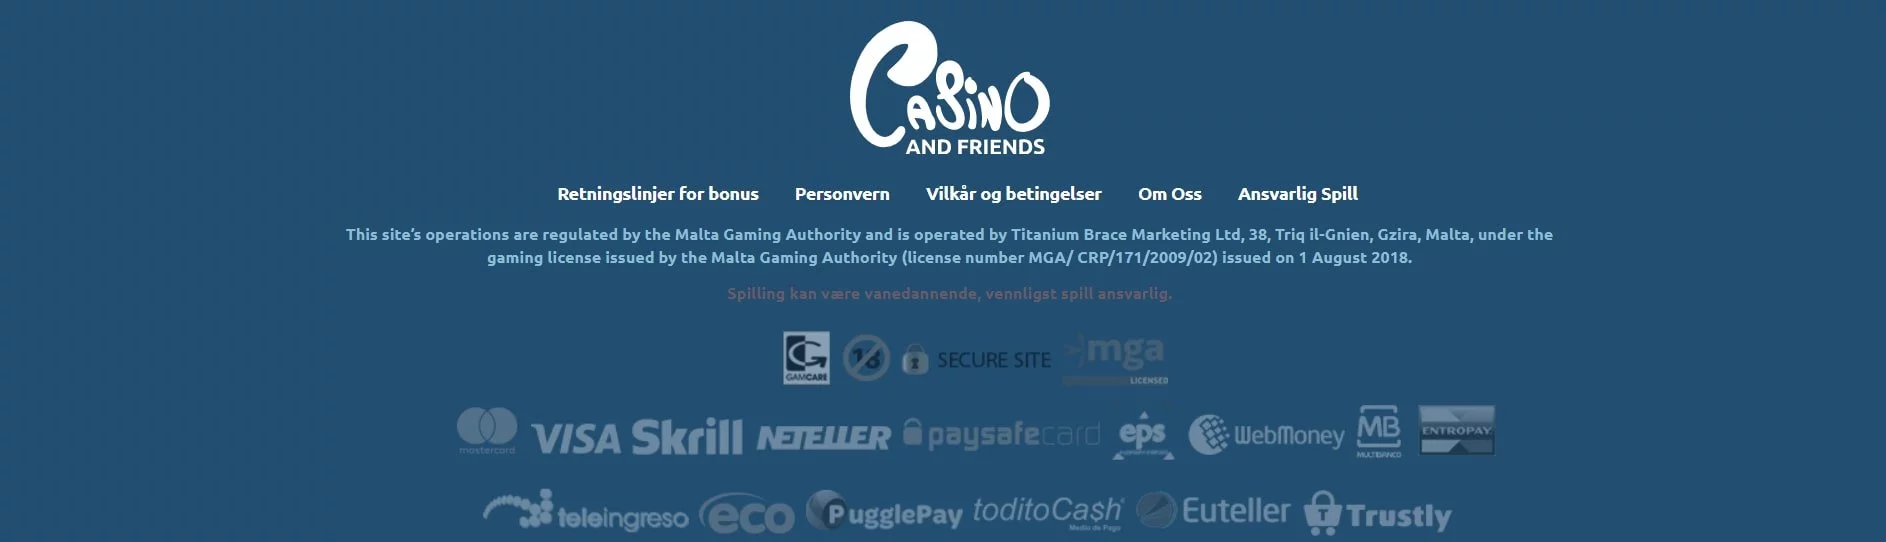 Casino and friends betalingsmetoder